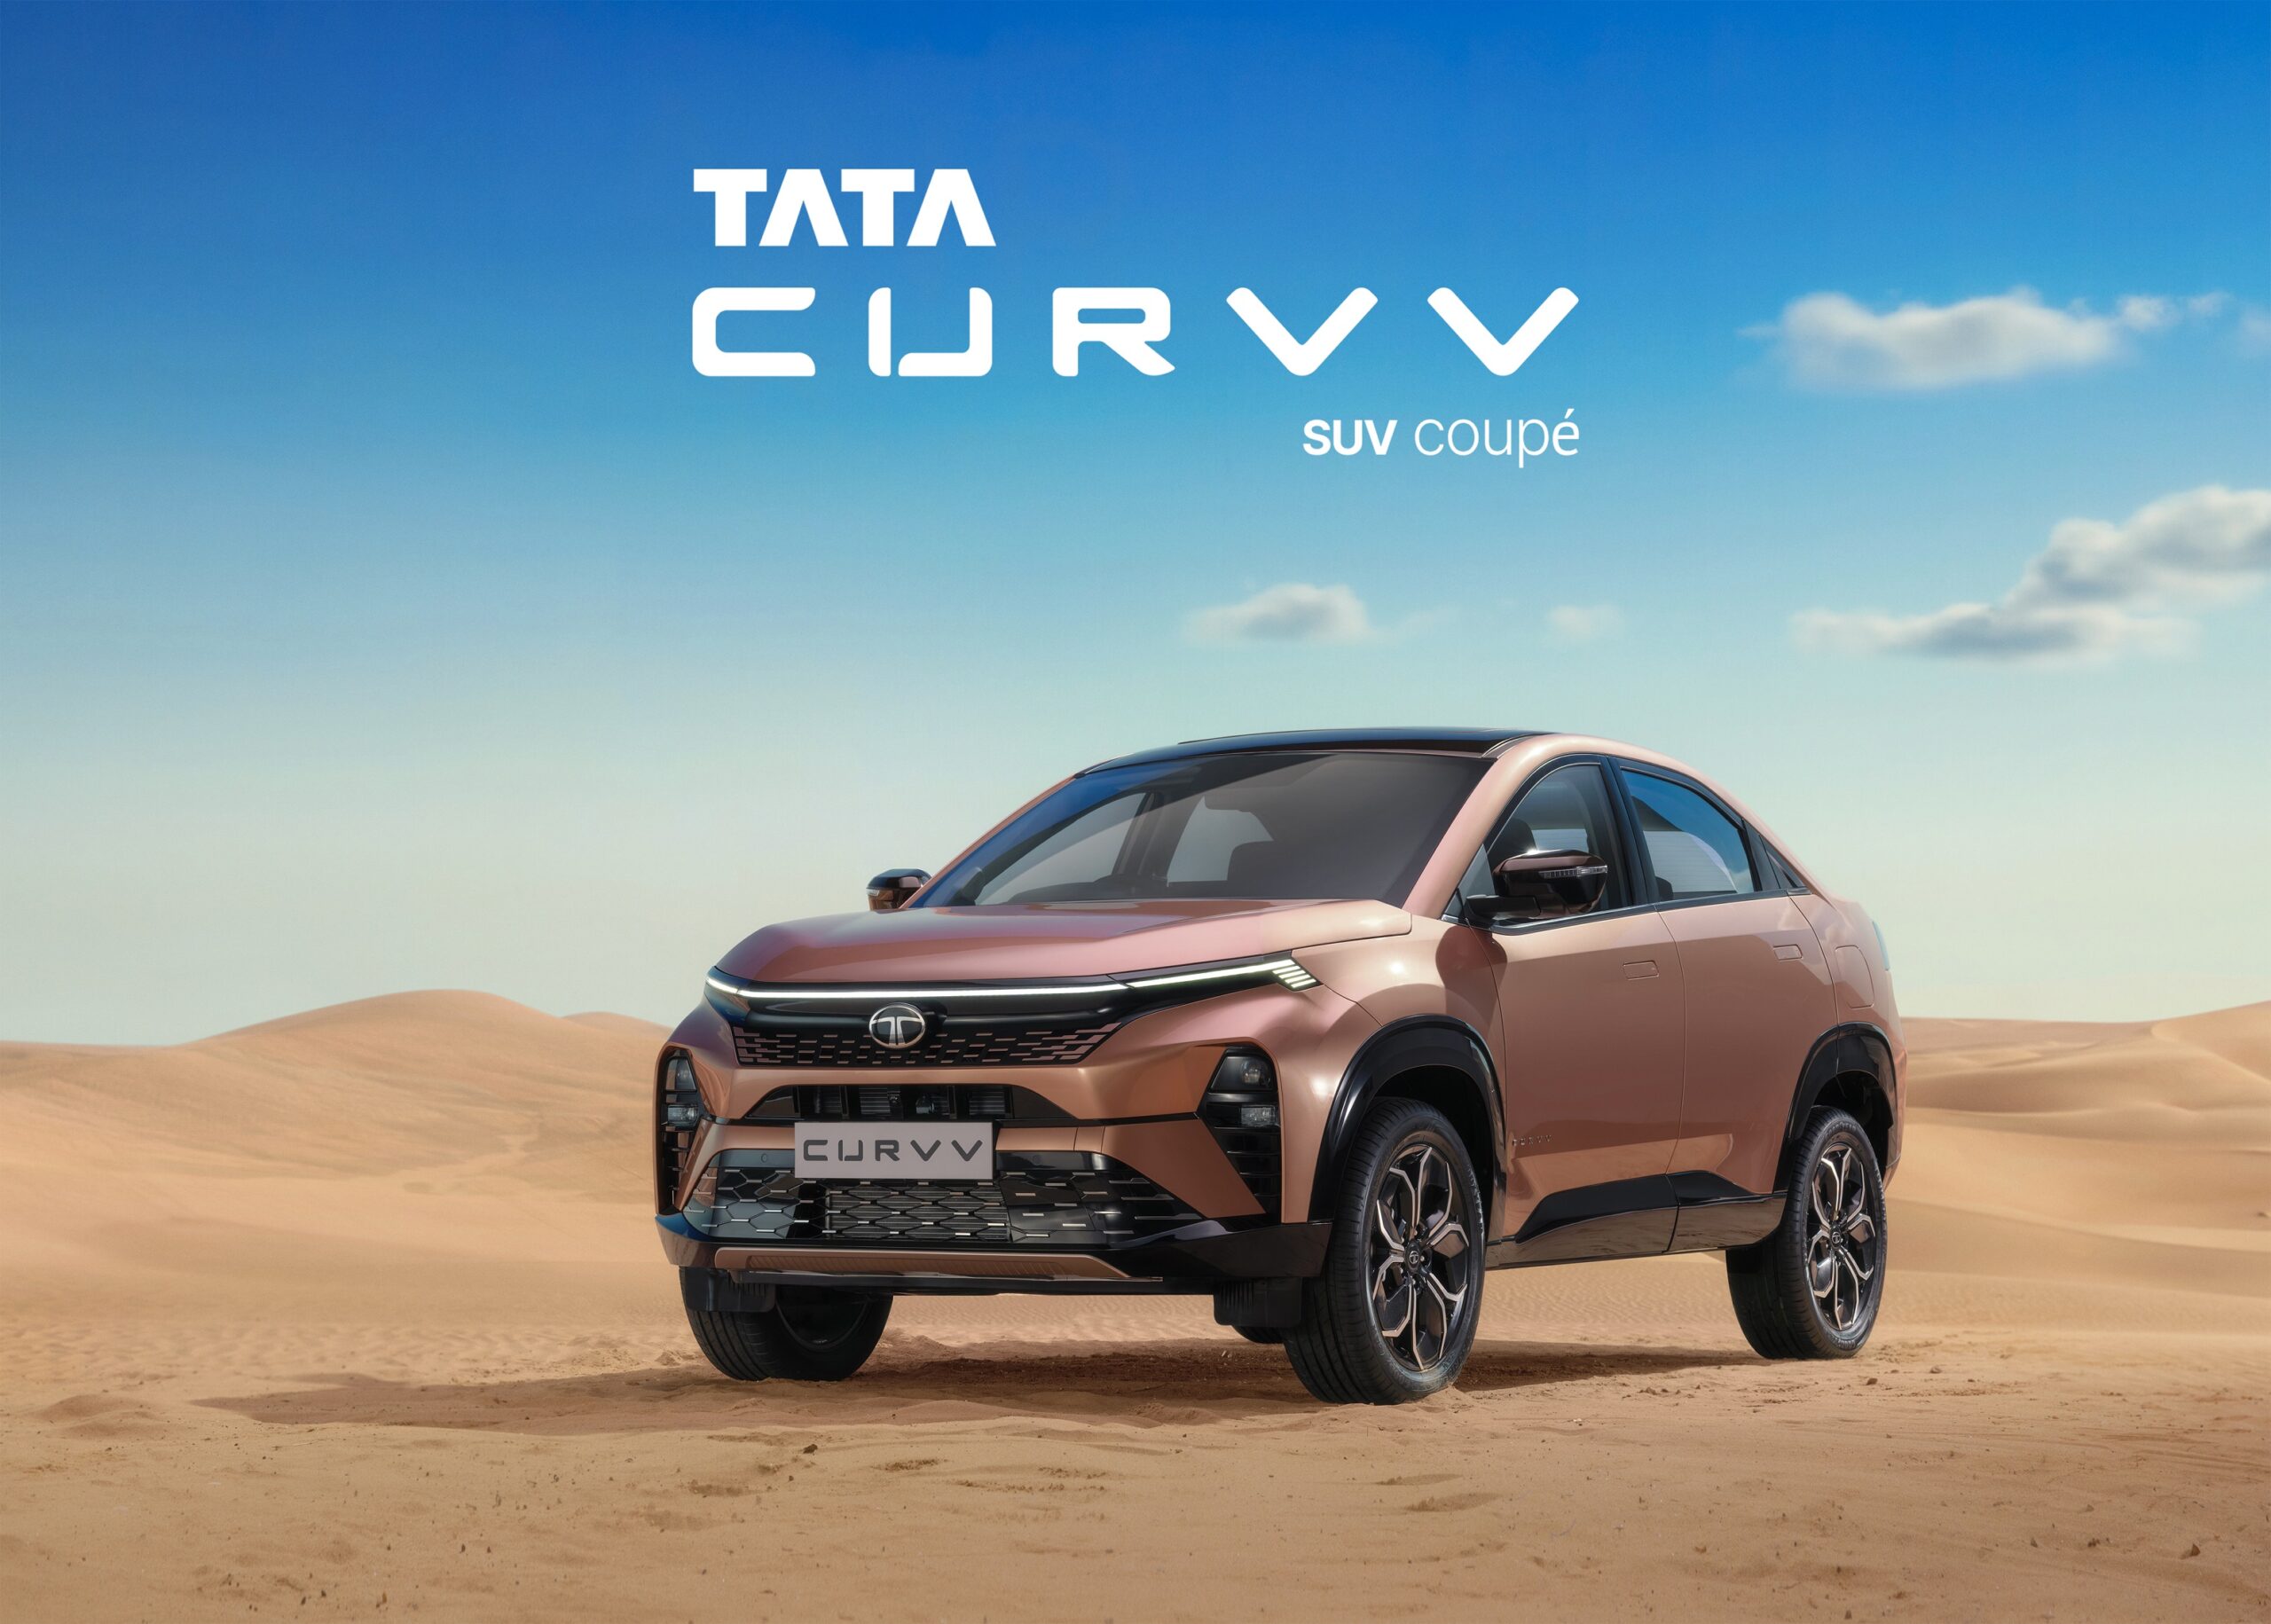 Tata Motors Unveils India’s First SUV Coupé, the Tata Curvv